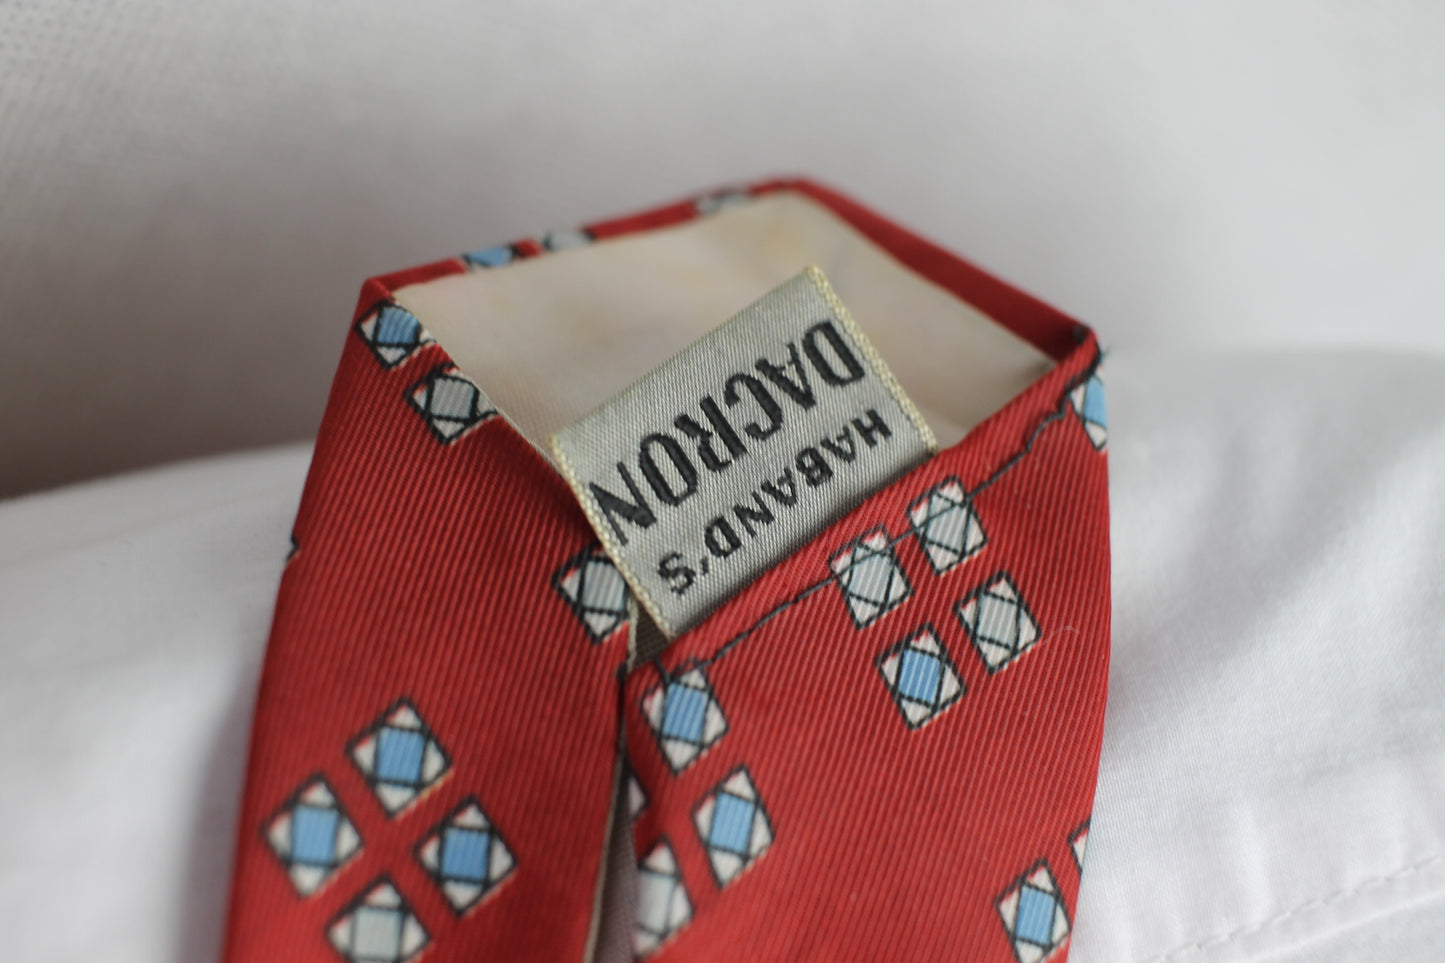 Vintage Haband 1950s/60s bright red blue green squares pattern tie